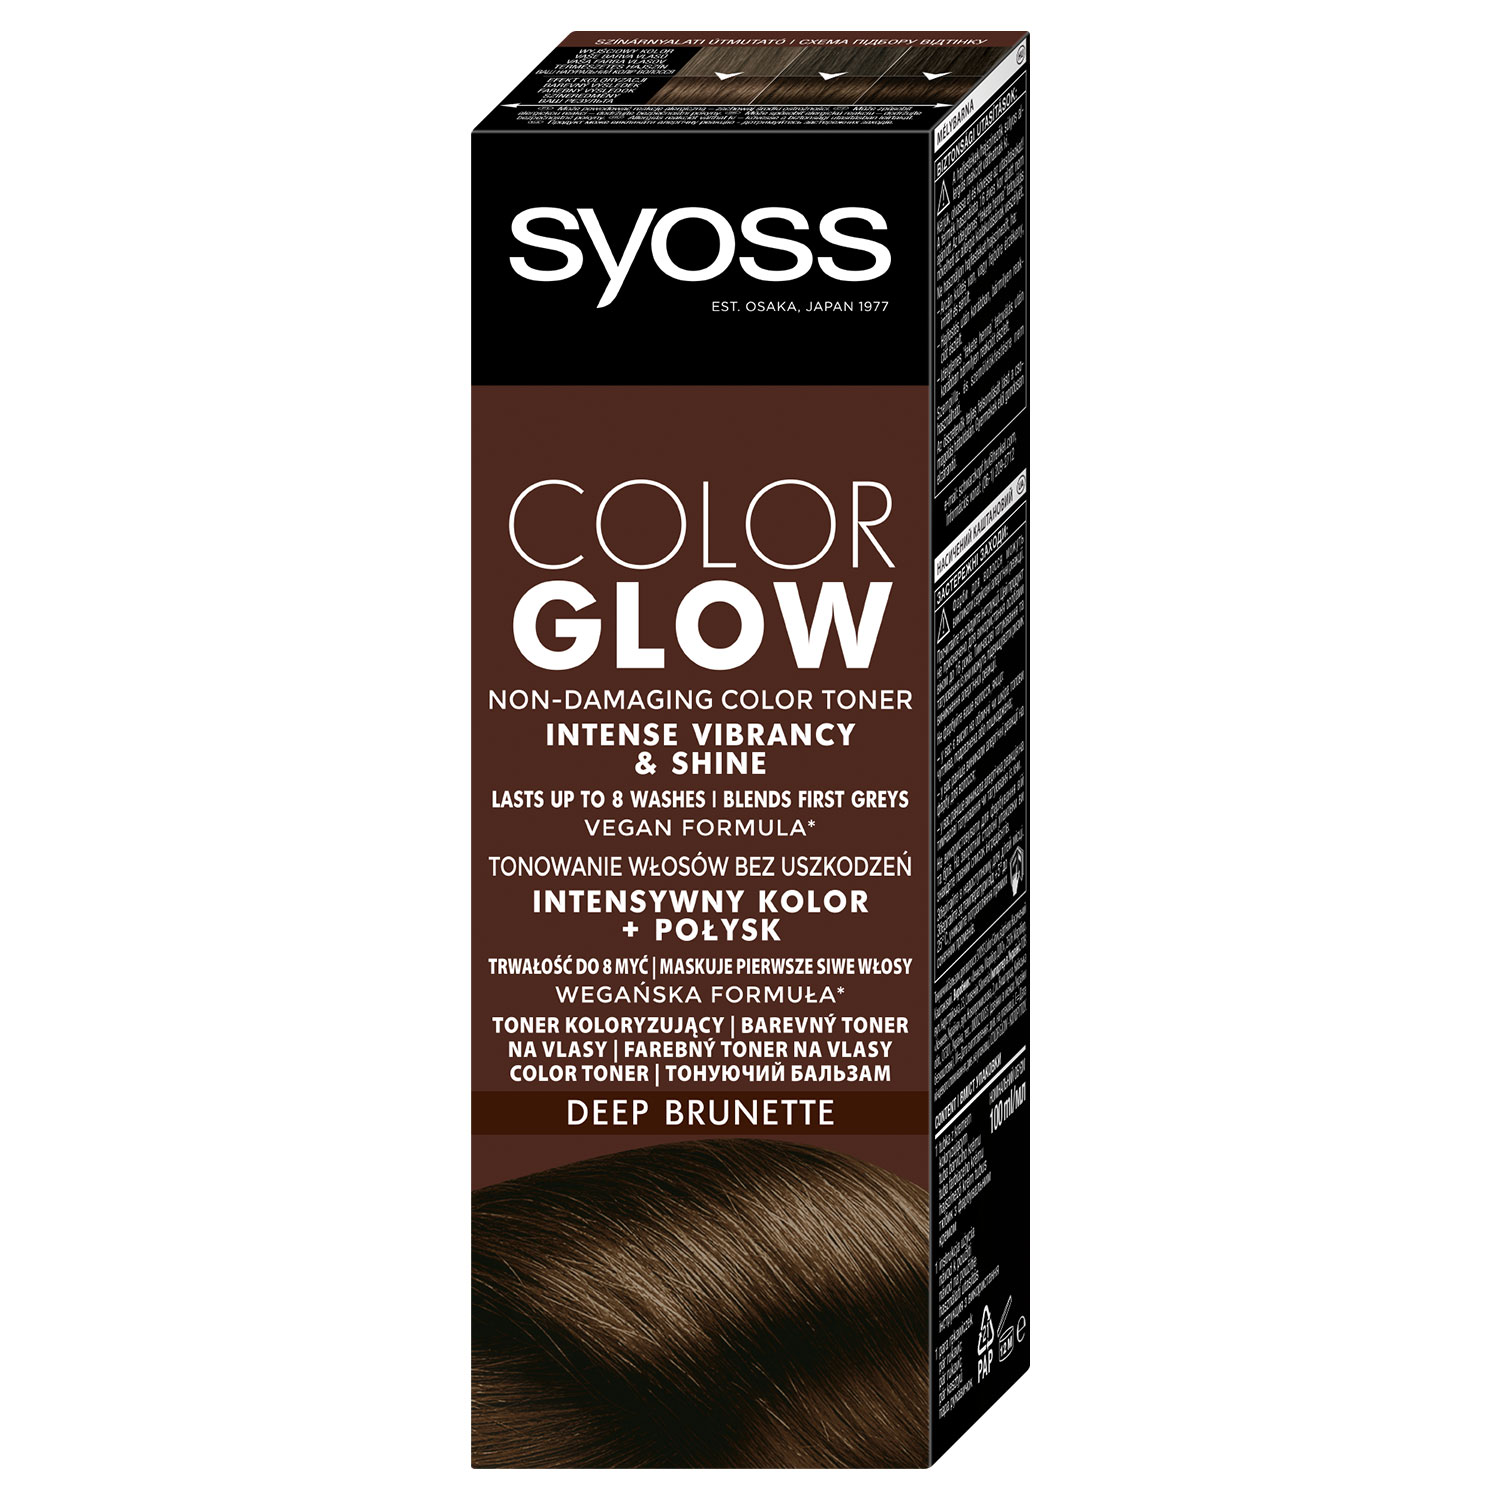 Balm SYOSS Color Glow Rich Chestnut without ammonia for hair toning 150ml